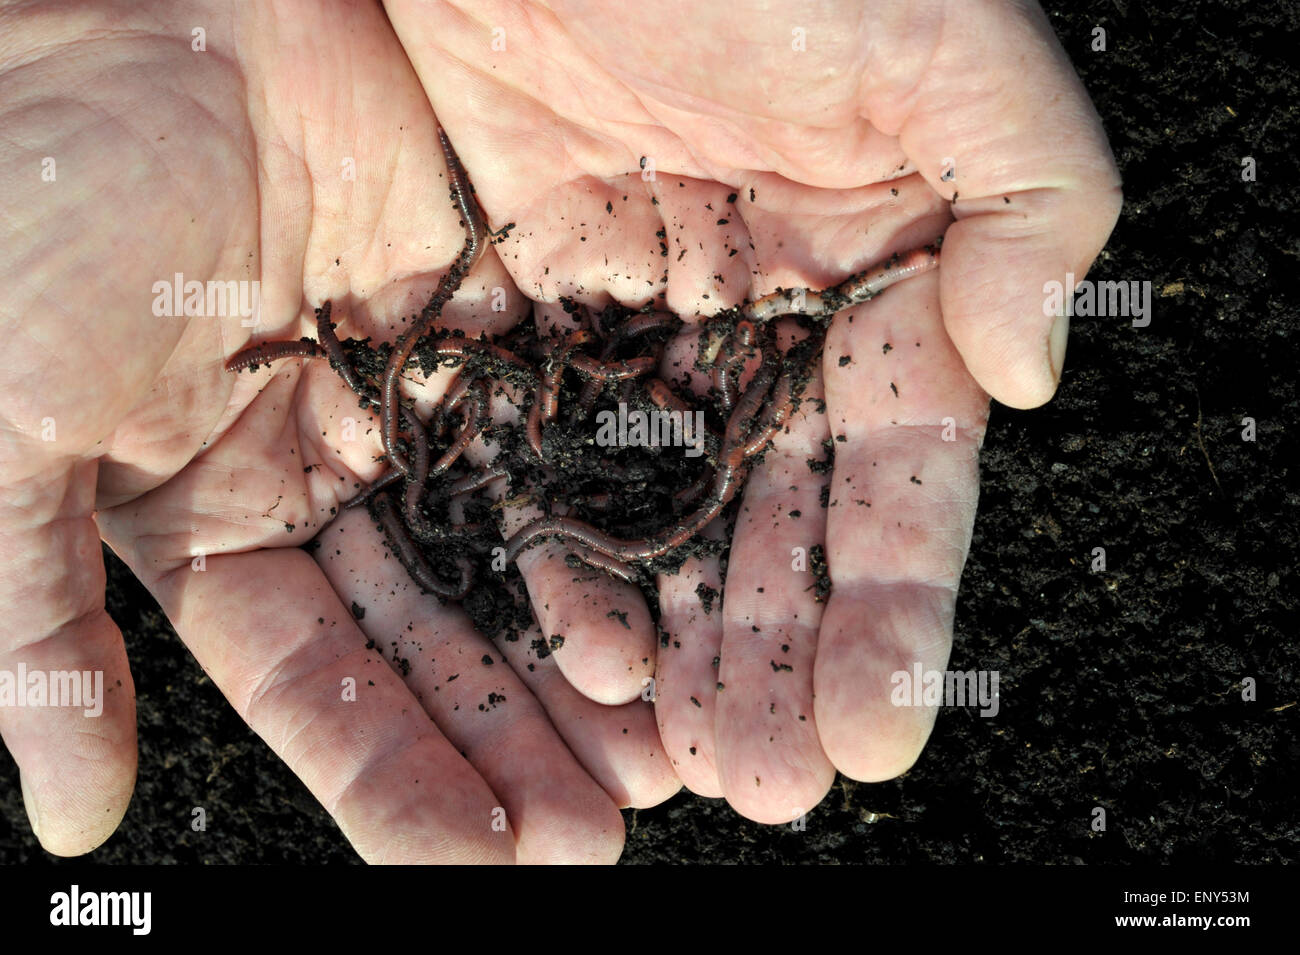 Compost and worms in the hands of a gardener. Stock Photo